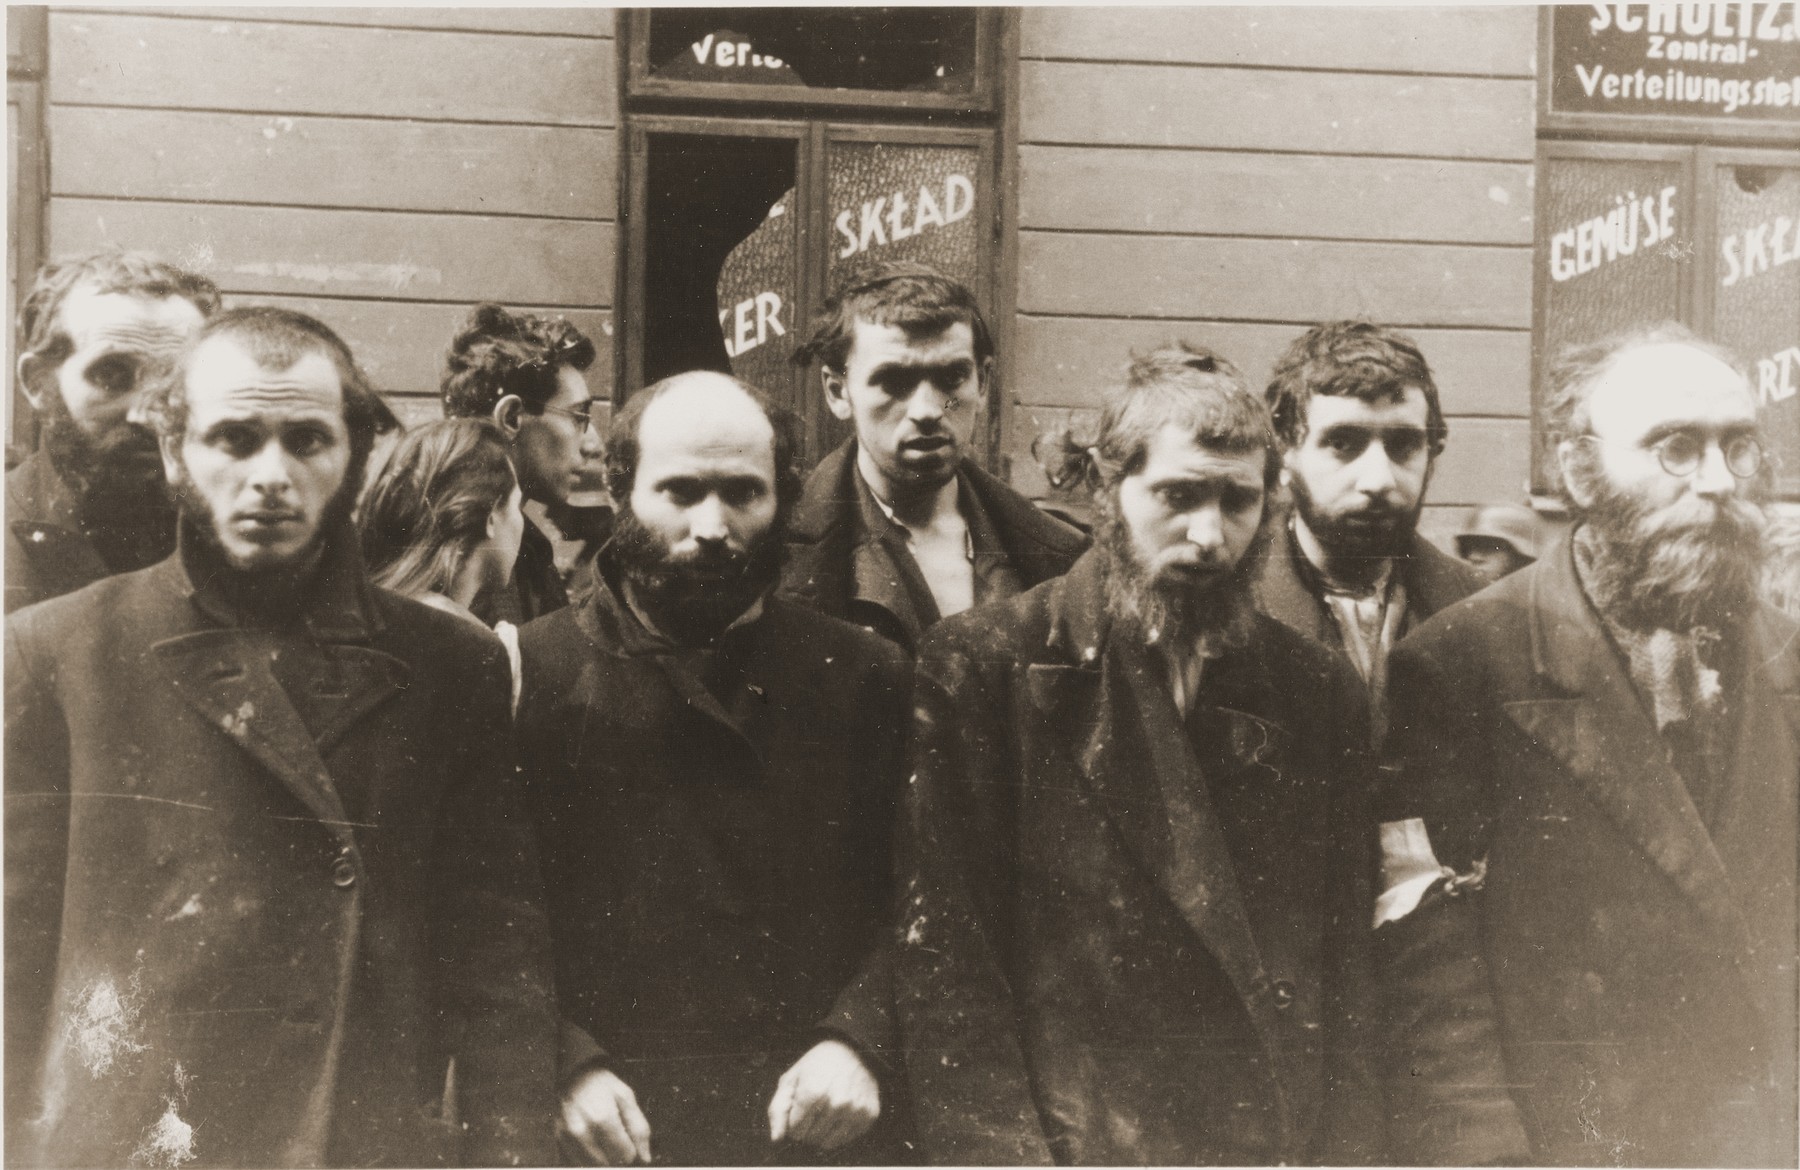 Religious Jews captured by the SS during the Warsaw ghetto uprising.  The original German caption reads: "Jewish rabbis."

From left to right are Rabbi Lipa Kaplan, Eliyahu Levin (son of Rabbi Hersh Henoch of Bedzin), Mendel Alter (son of Rabbi Nechemya Alter); Yankel Levin (son of Rabbi Mottel Levin of Lodz and grandson of the rabbi of Bedzin), unknown and Rabbi Heschel Rappaport, a Gerer Chassid and mentor to young Chassidim.